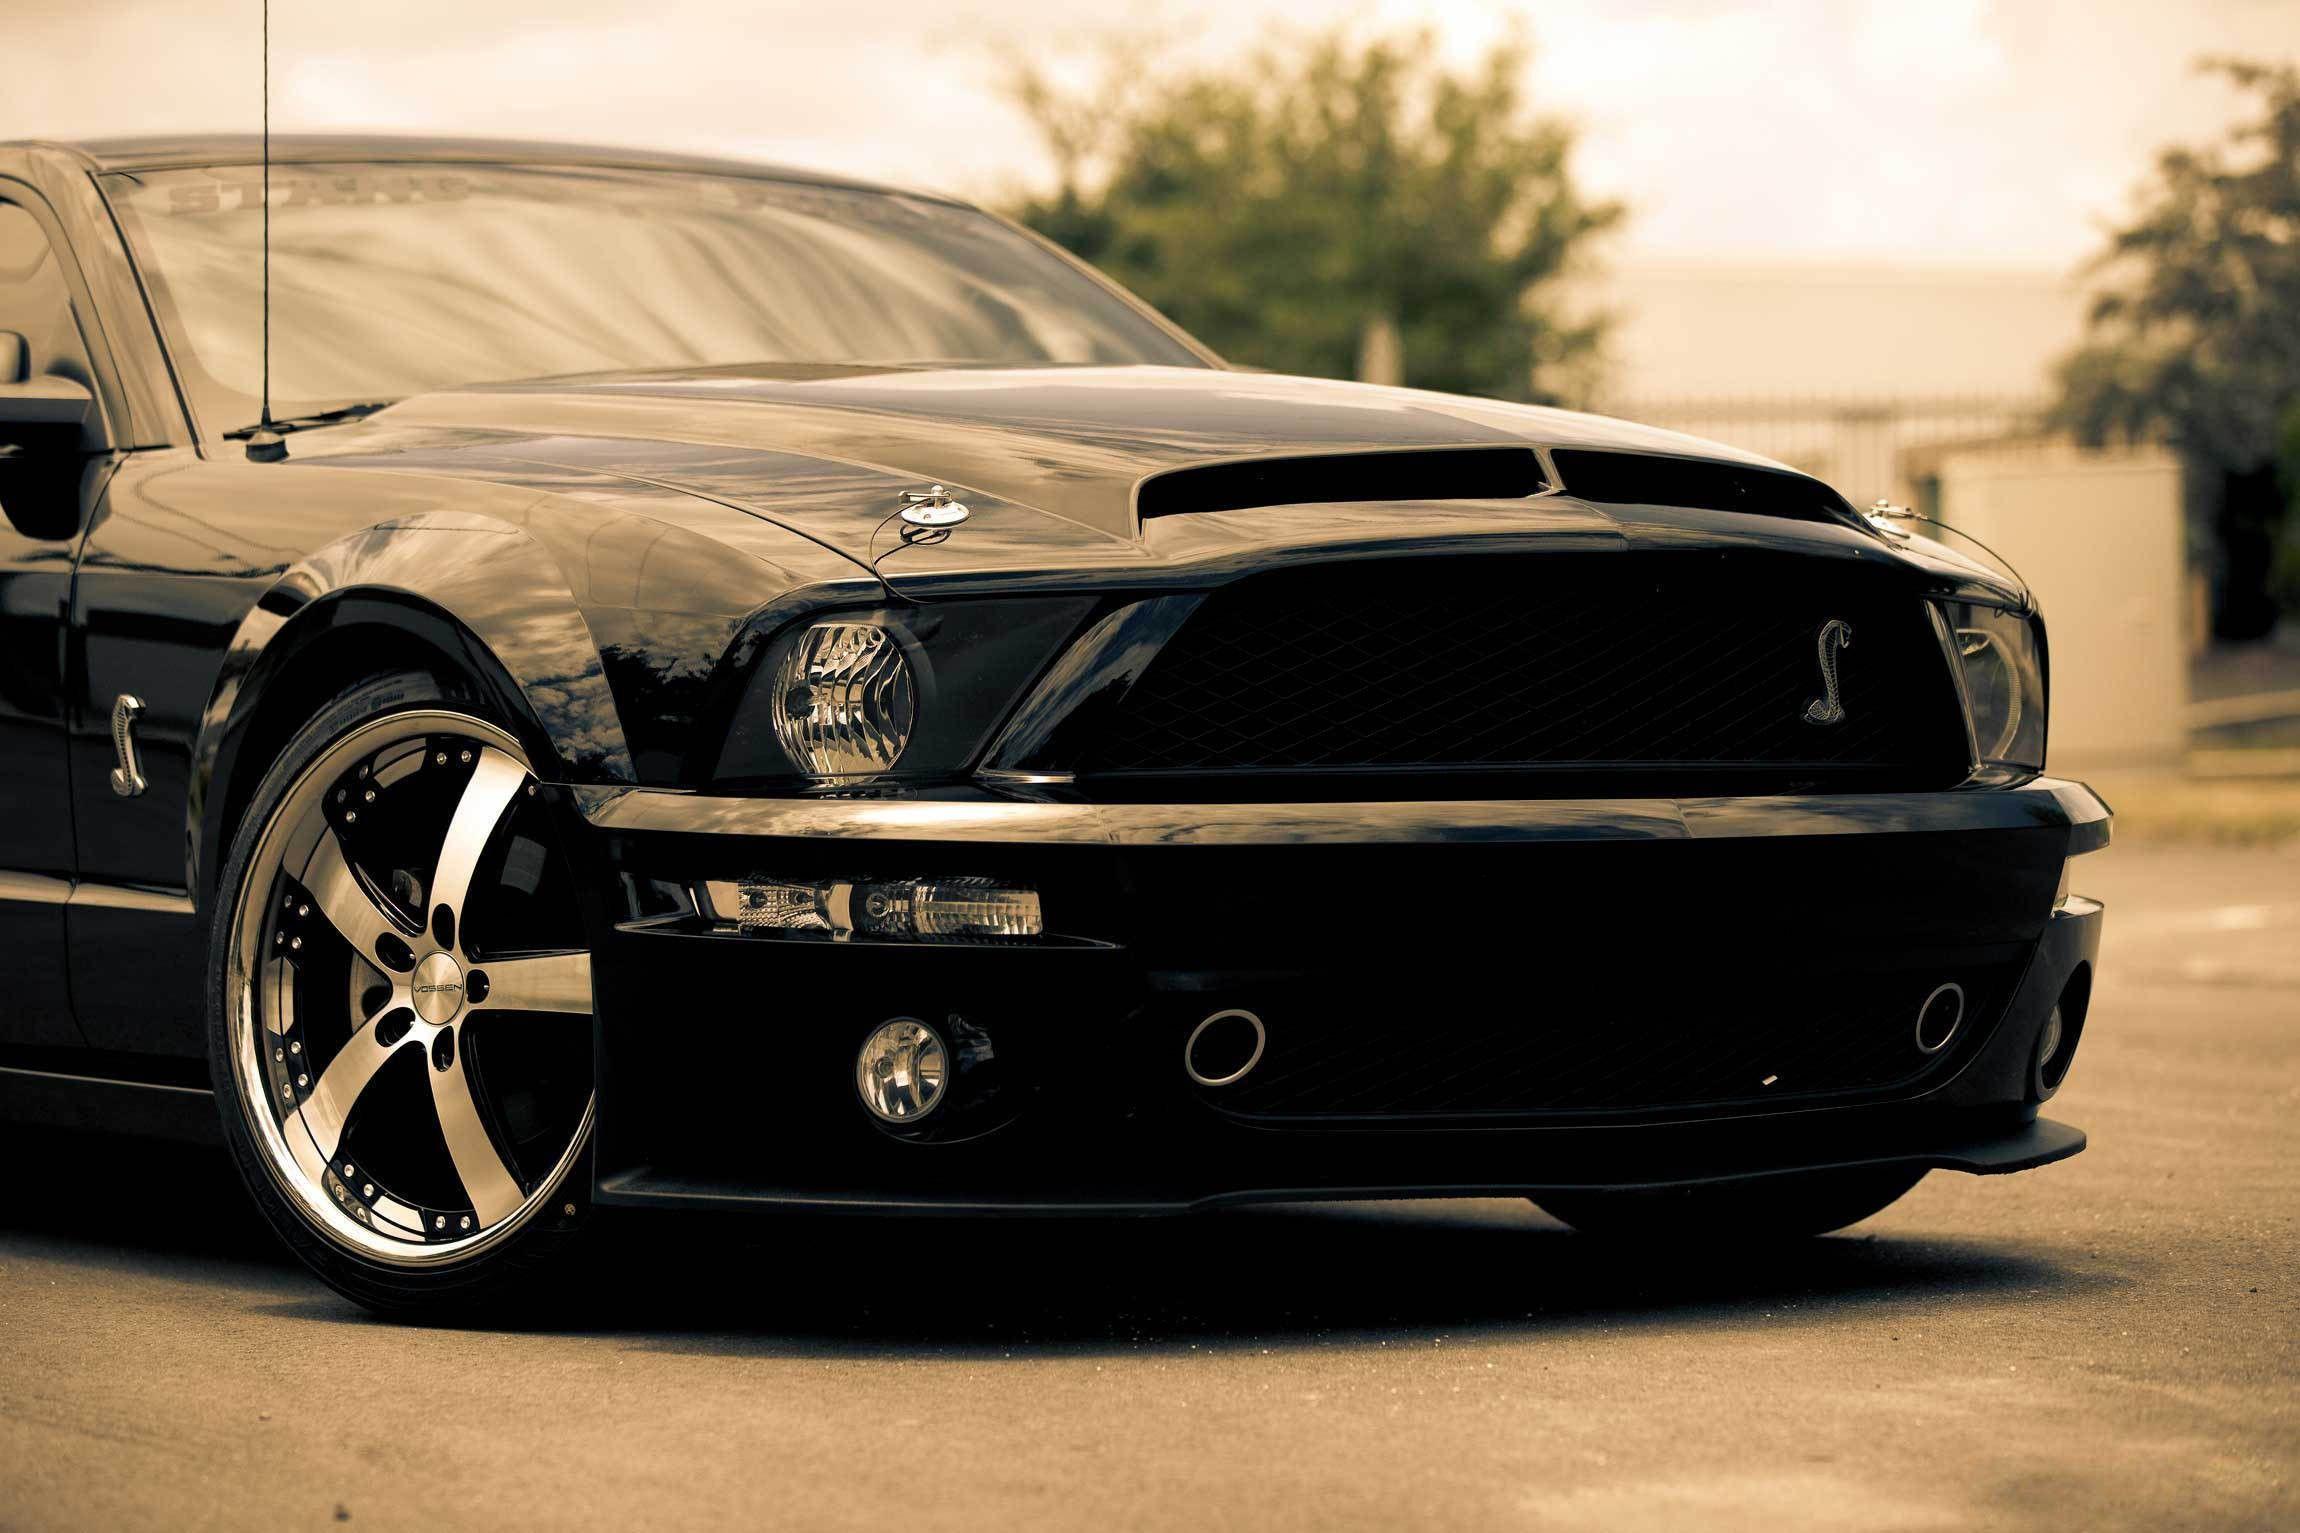 car Muscle Cars Ford Mustang GT Ford Mustang Wallpaper HD. HD